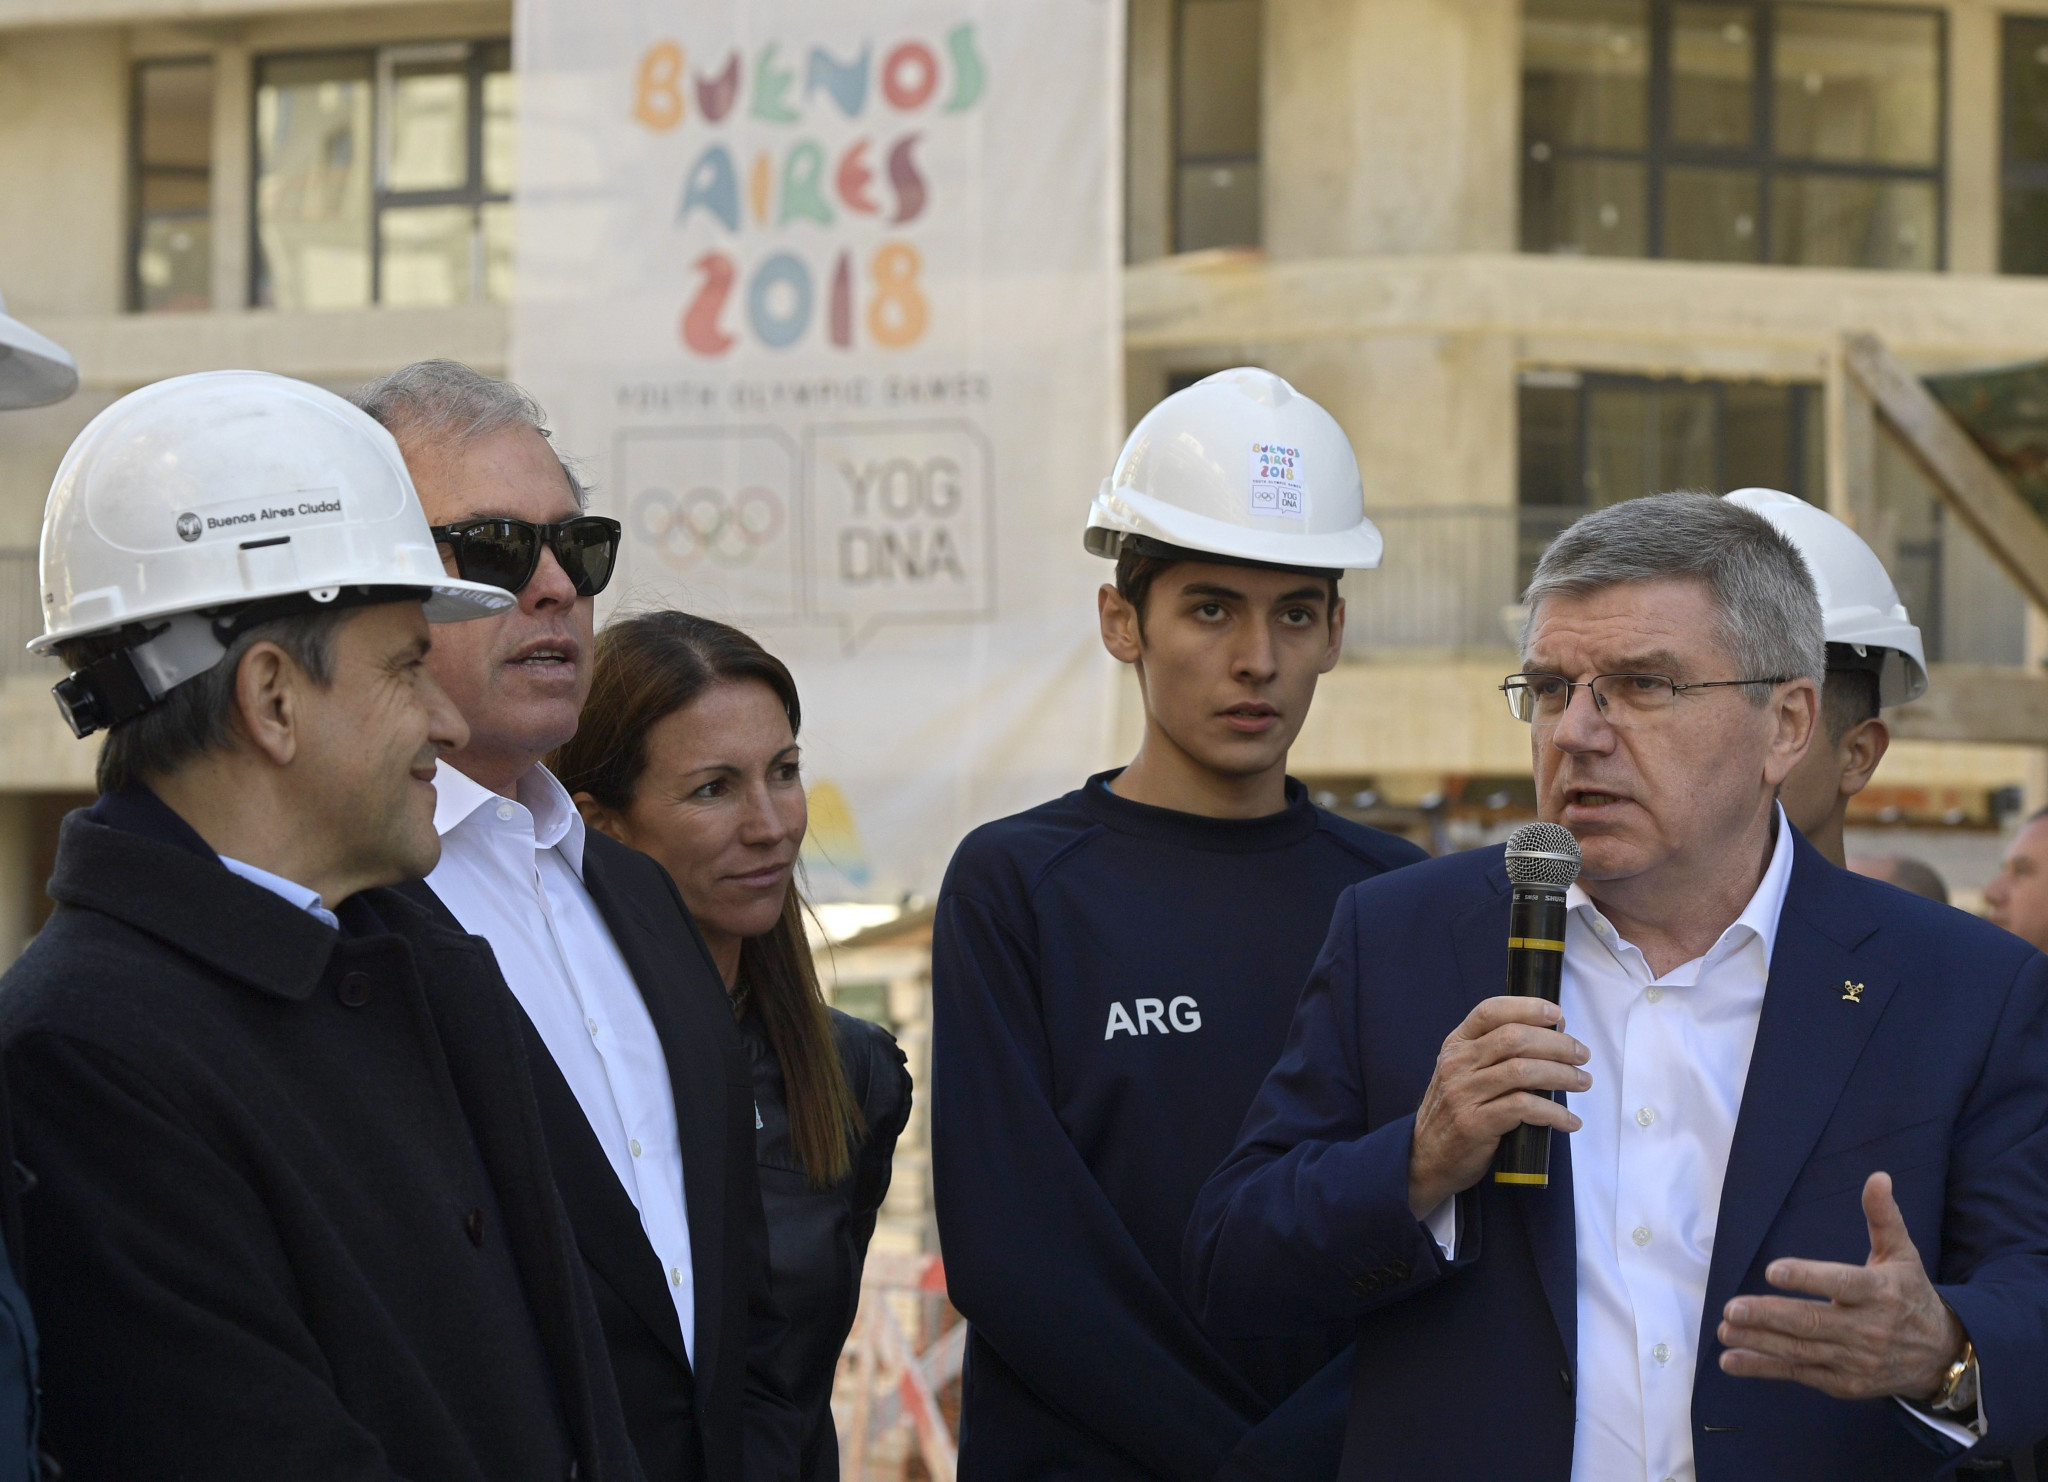 Buenos Aires is due to host the 2018 Summer Youth Olympics ©Getty Images